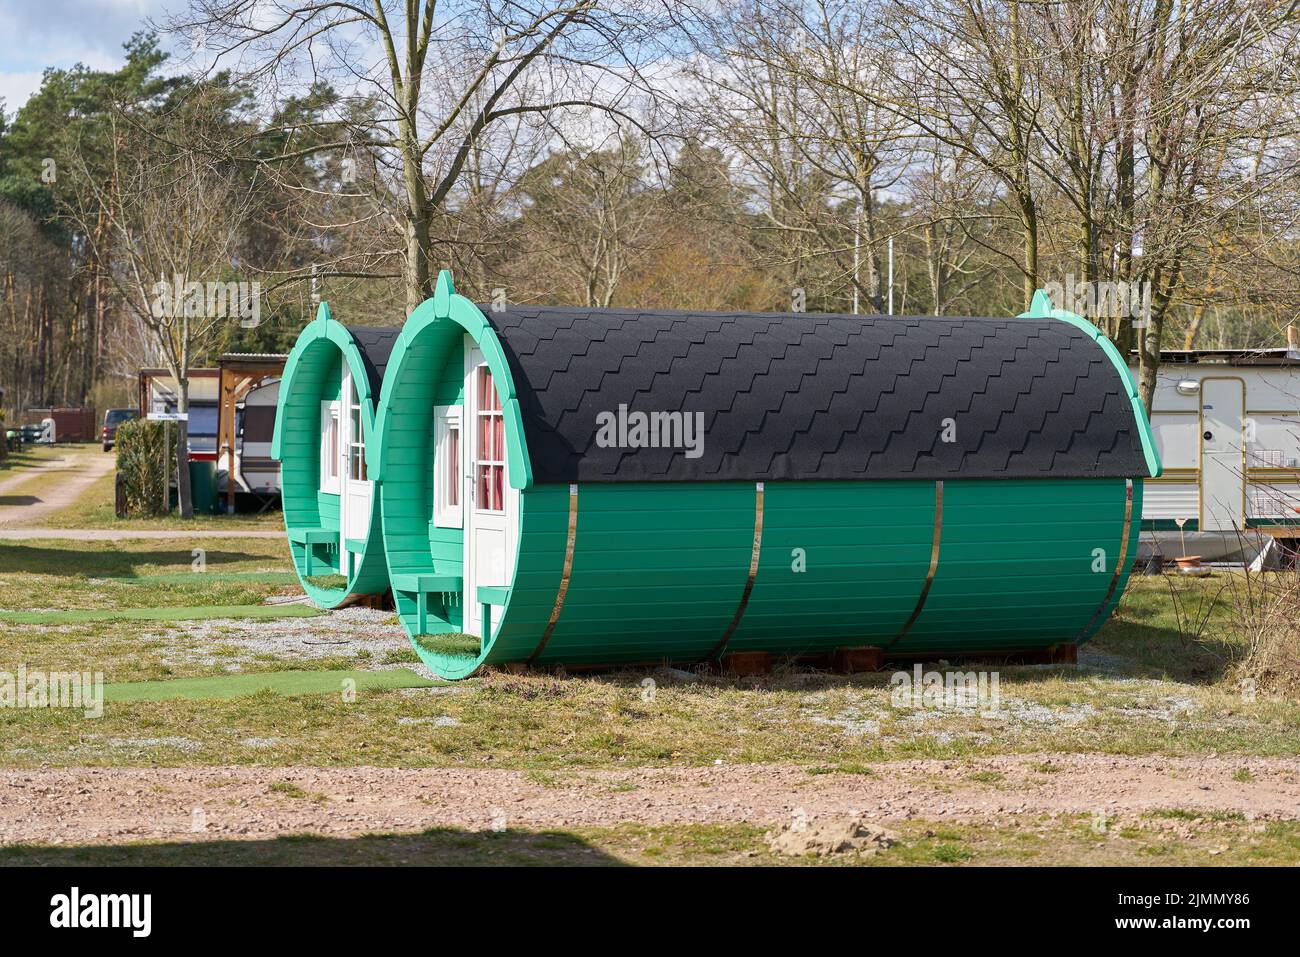 Wooden sleeping barrel to spend the night on a campsite in Germany Stock Photo